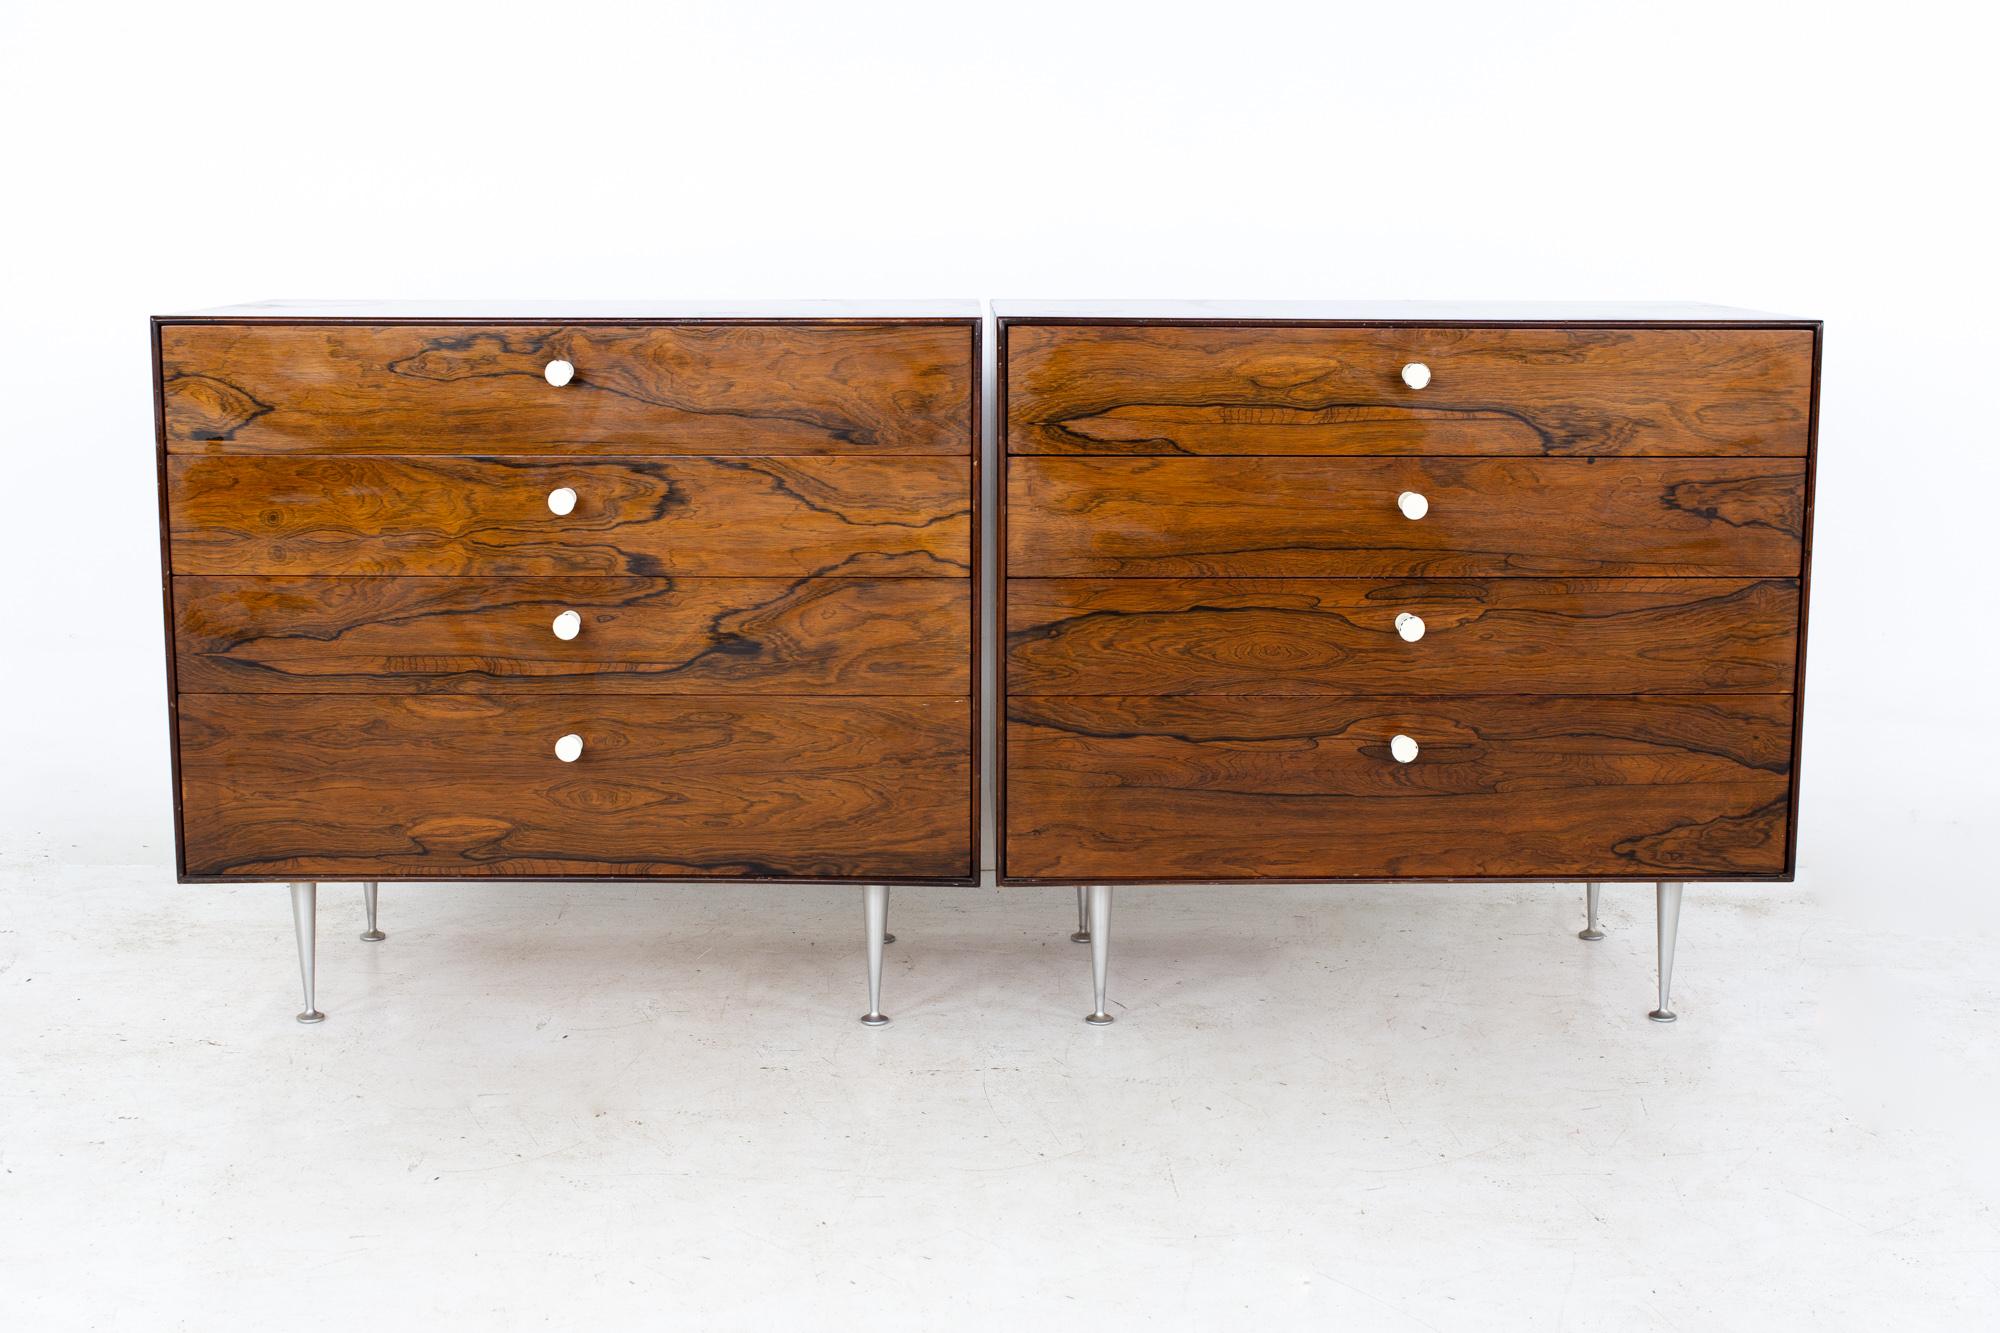 George Nelson for Herman Miller mid century thin edge rosewood dresser chest of drawers - A pair
Each chest measures: 33.75 wide x 19 deep x 30.5 inches high

All pieces of furniture can be had in what we call restored vintage condition. That